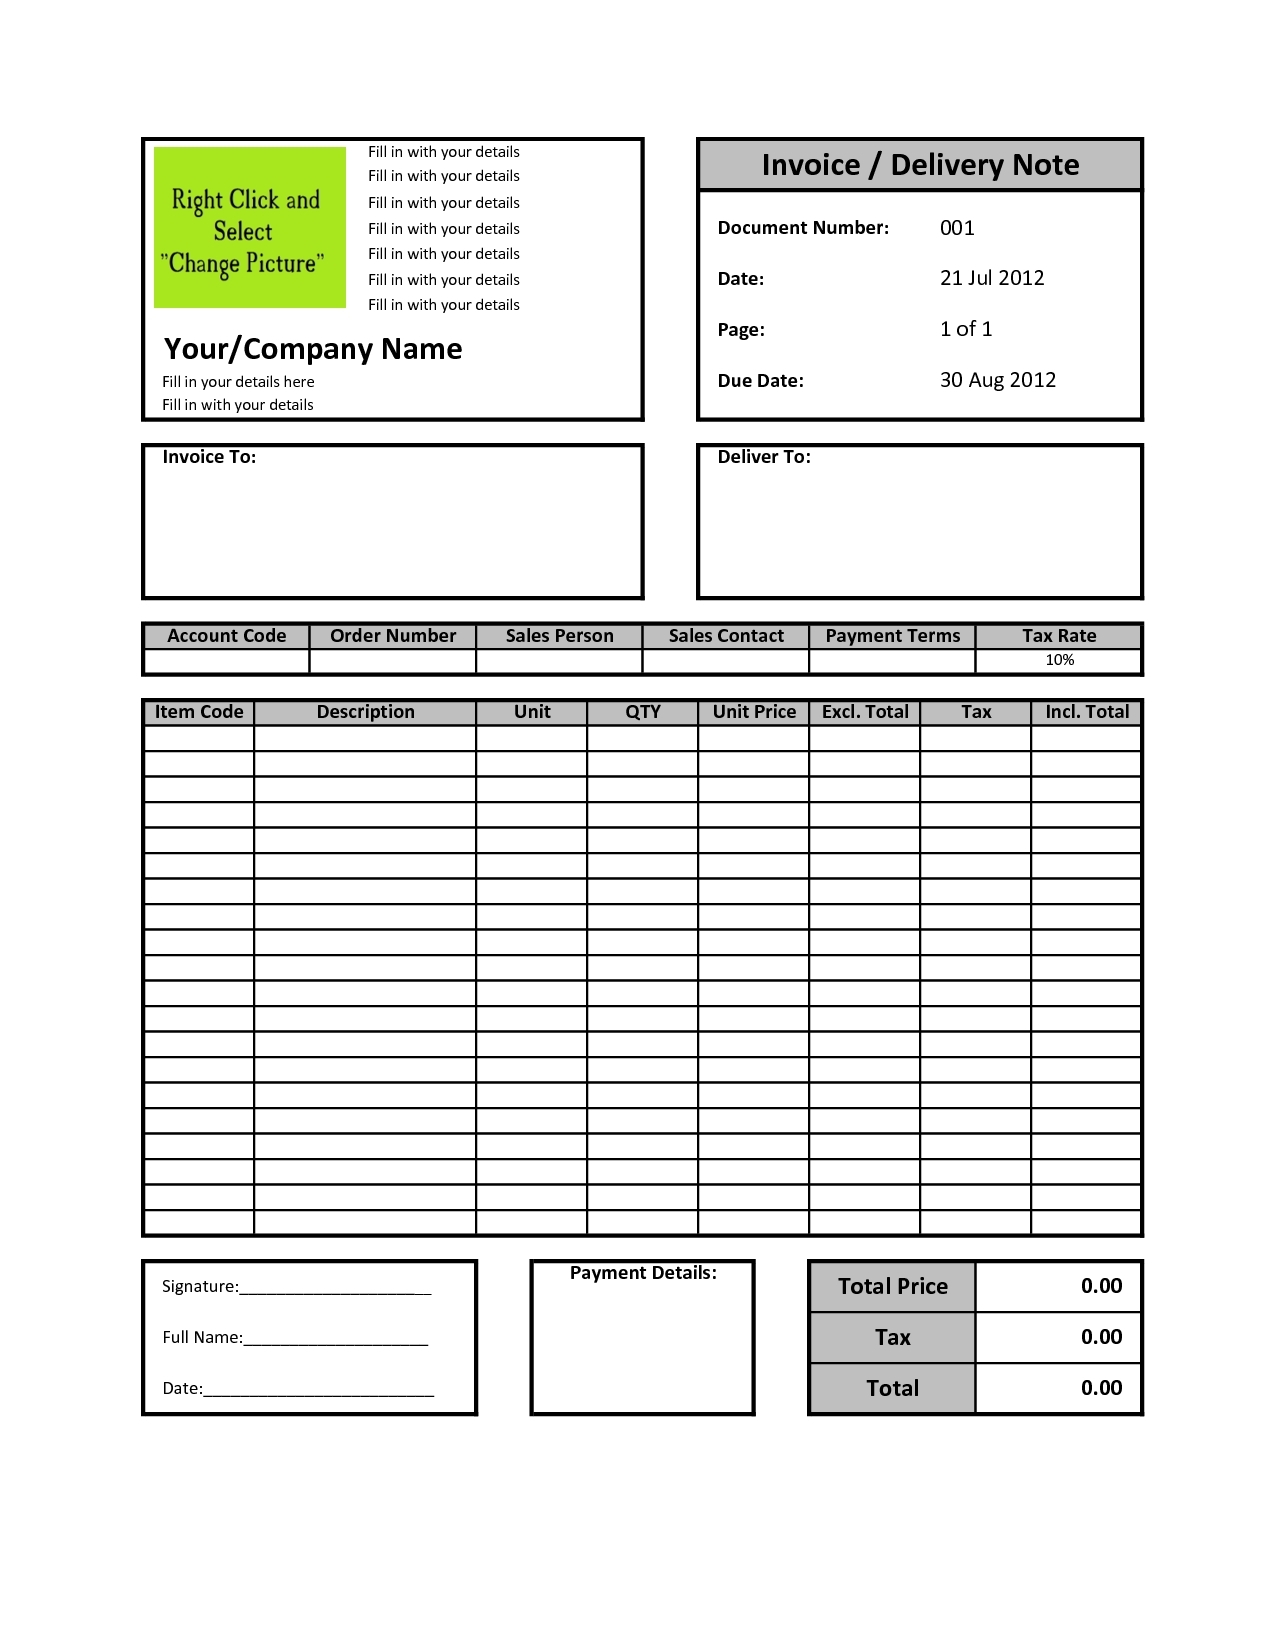 invoice template free excel residers microsoft excel invoice template free download